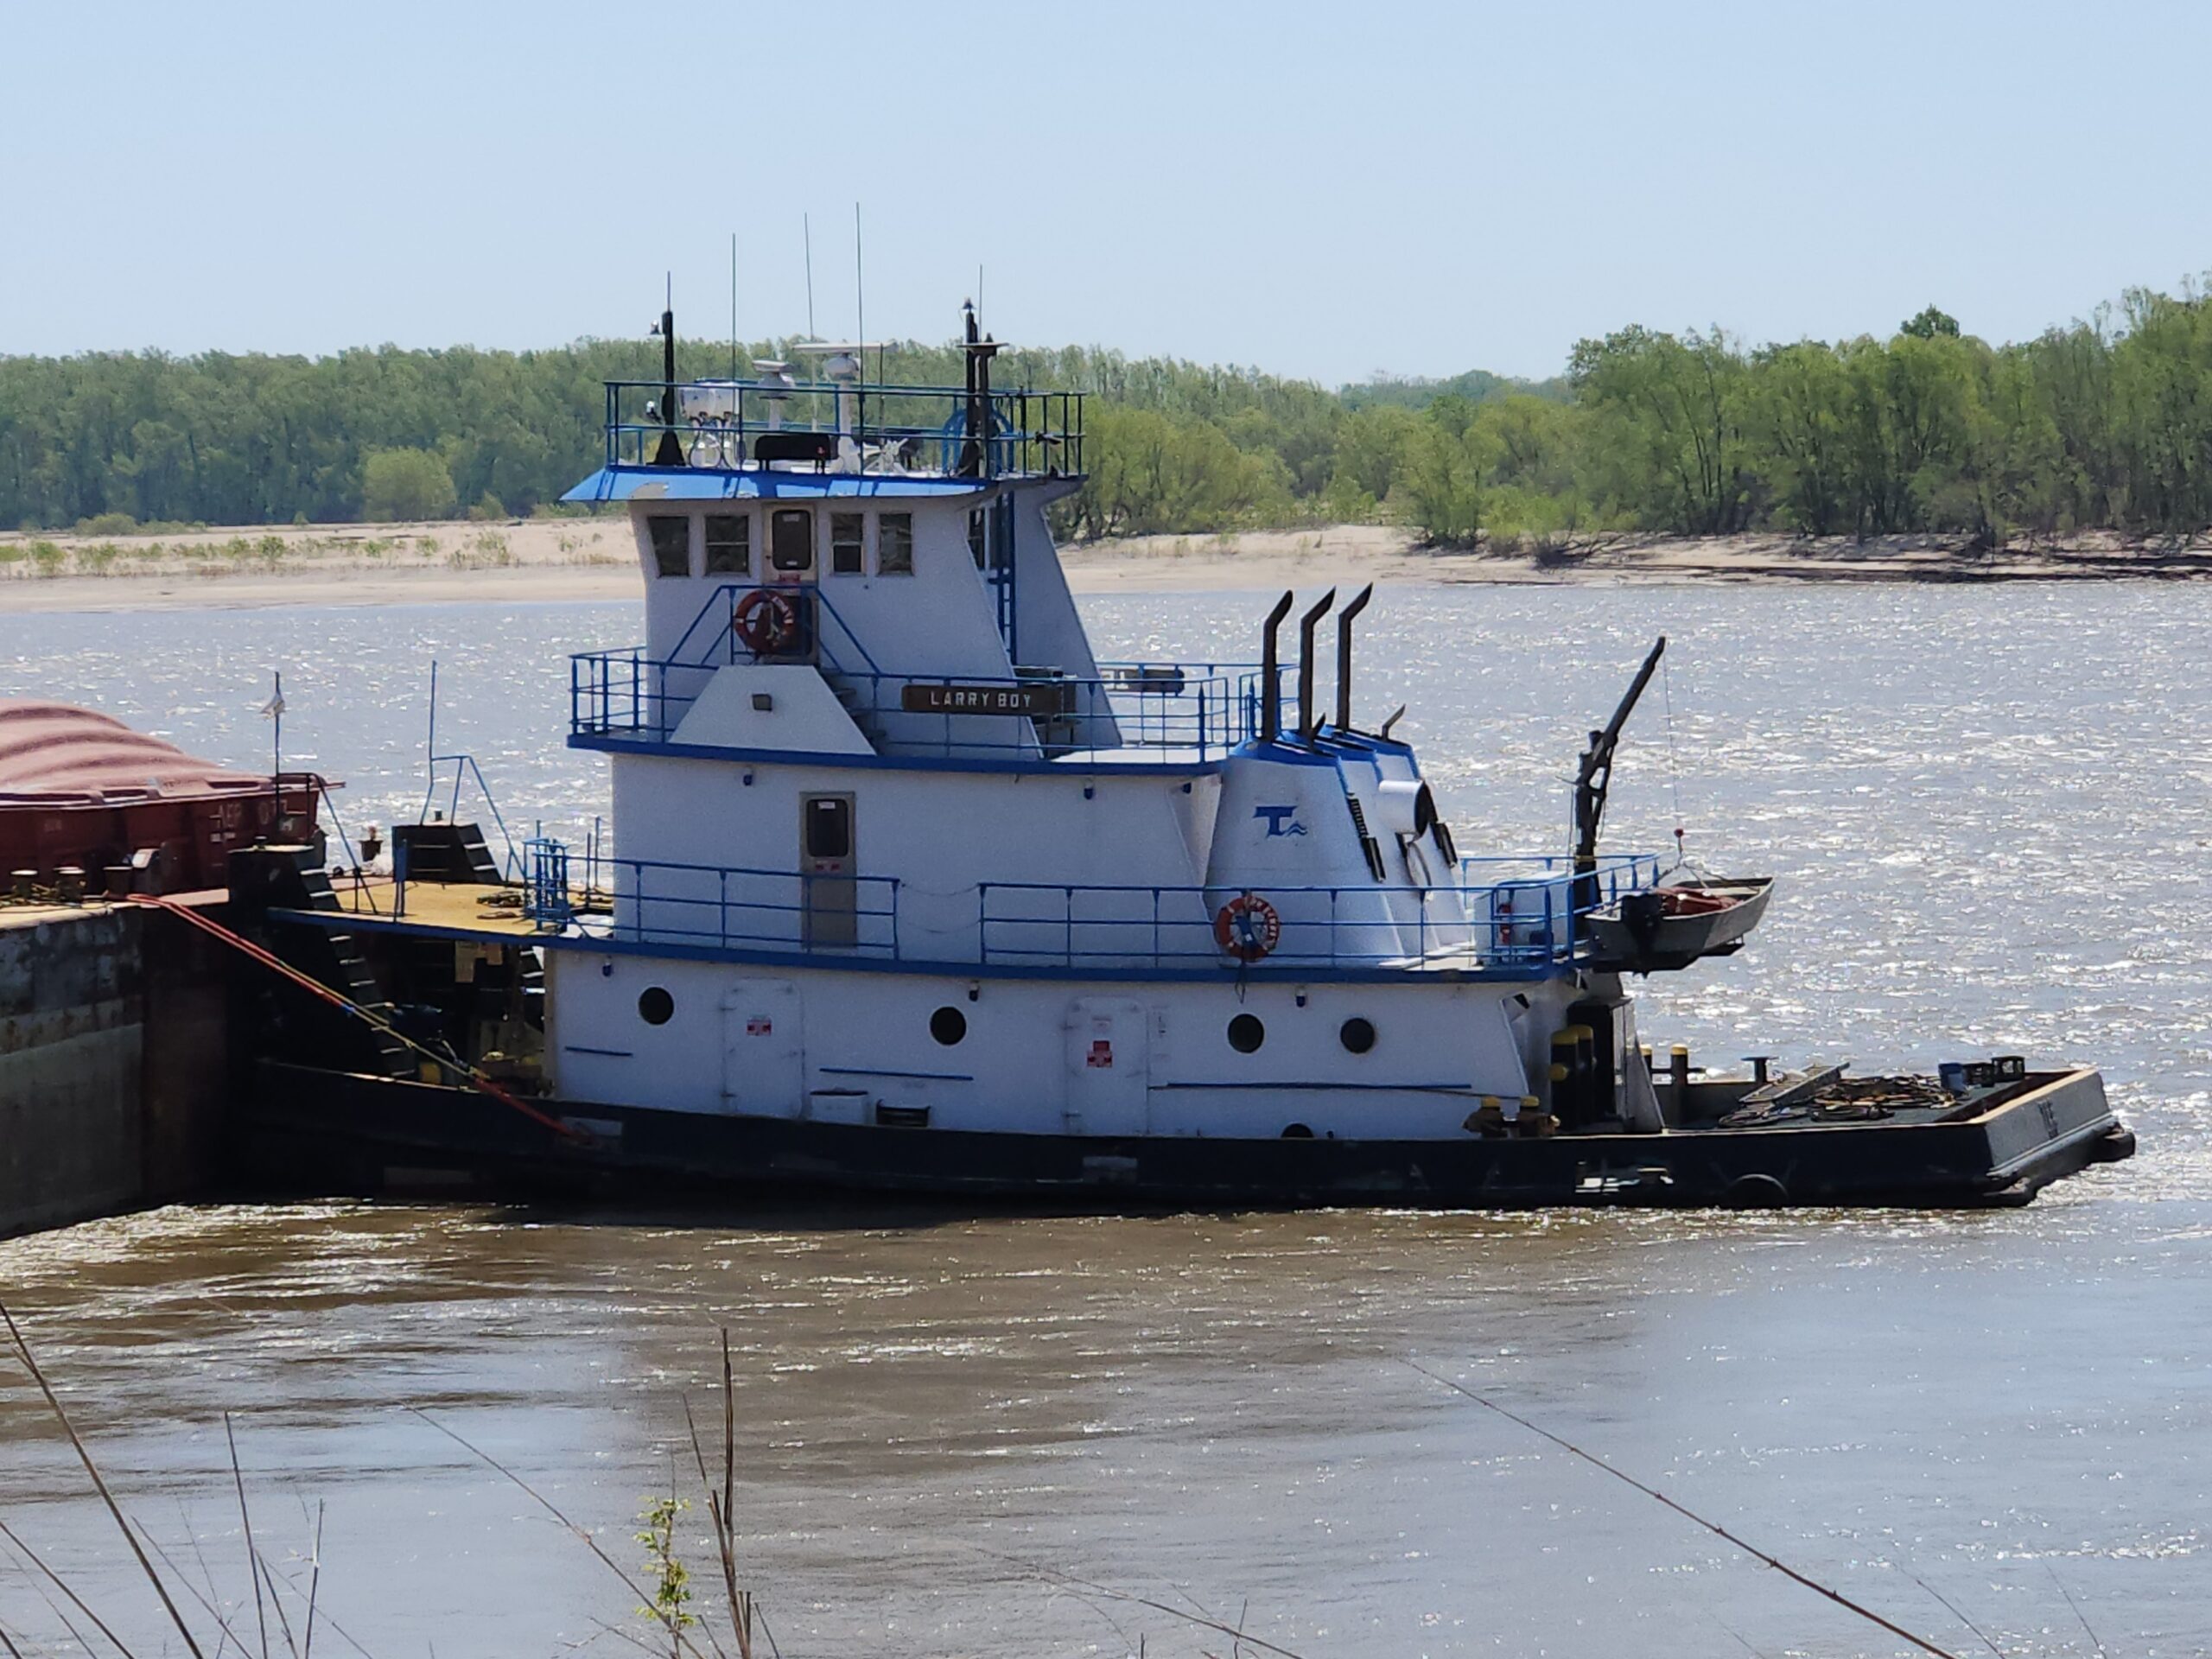 Photograph of the M/V Larry Boy pushboat